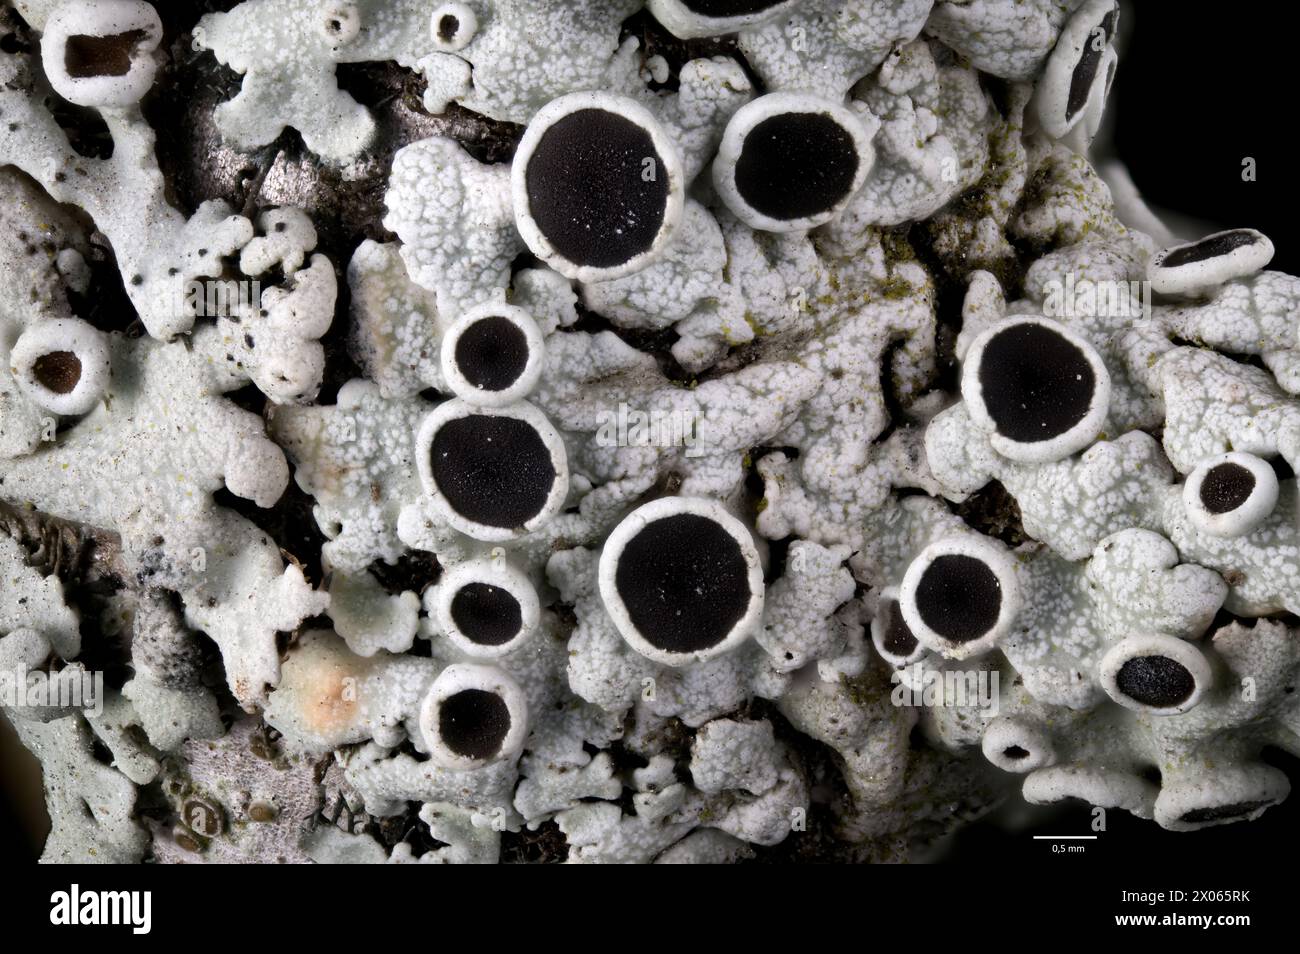 Rim lichen (Lecanora sp., possible L. circumborealis) with prominent apothecia (ascocarps or fruiting bodies). From Hidra, south-western Norway. Stock Photo